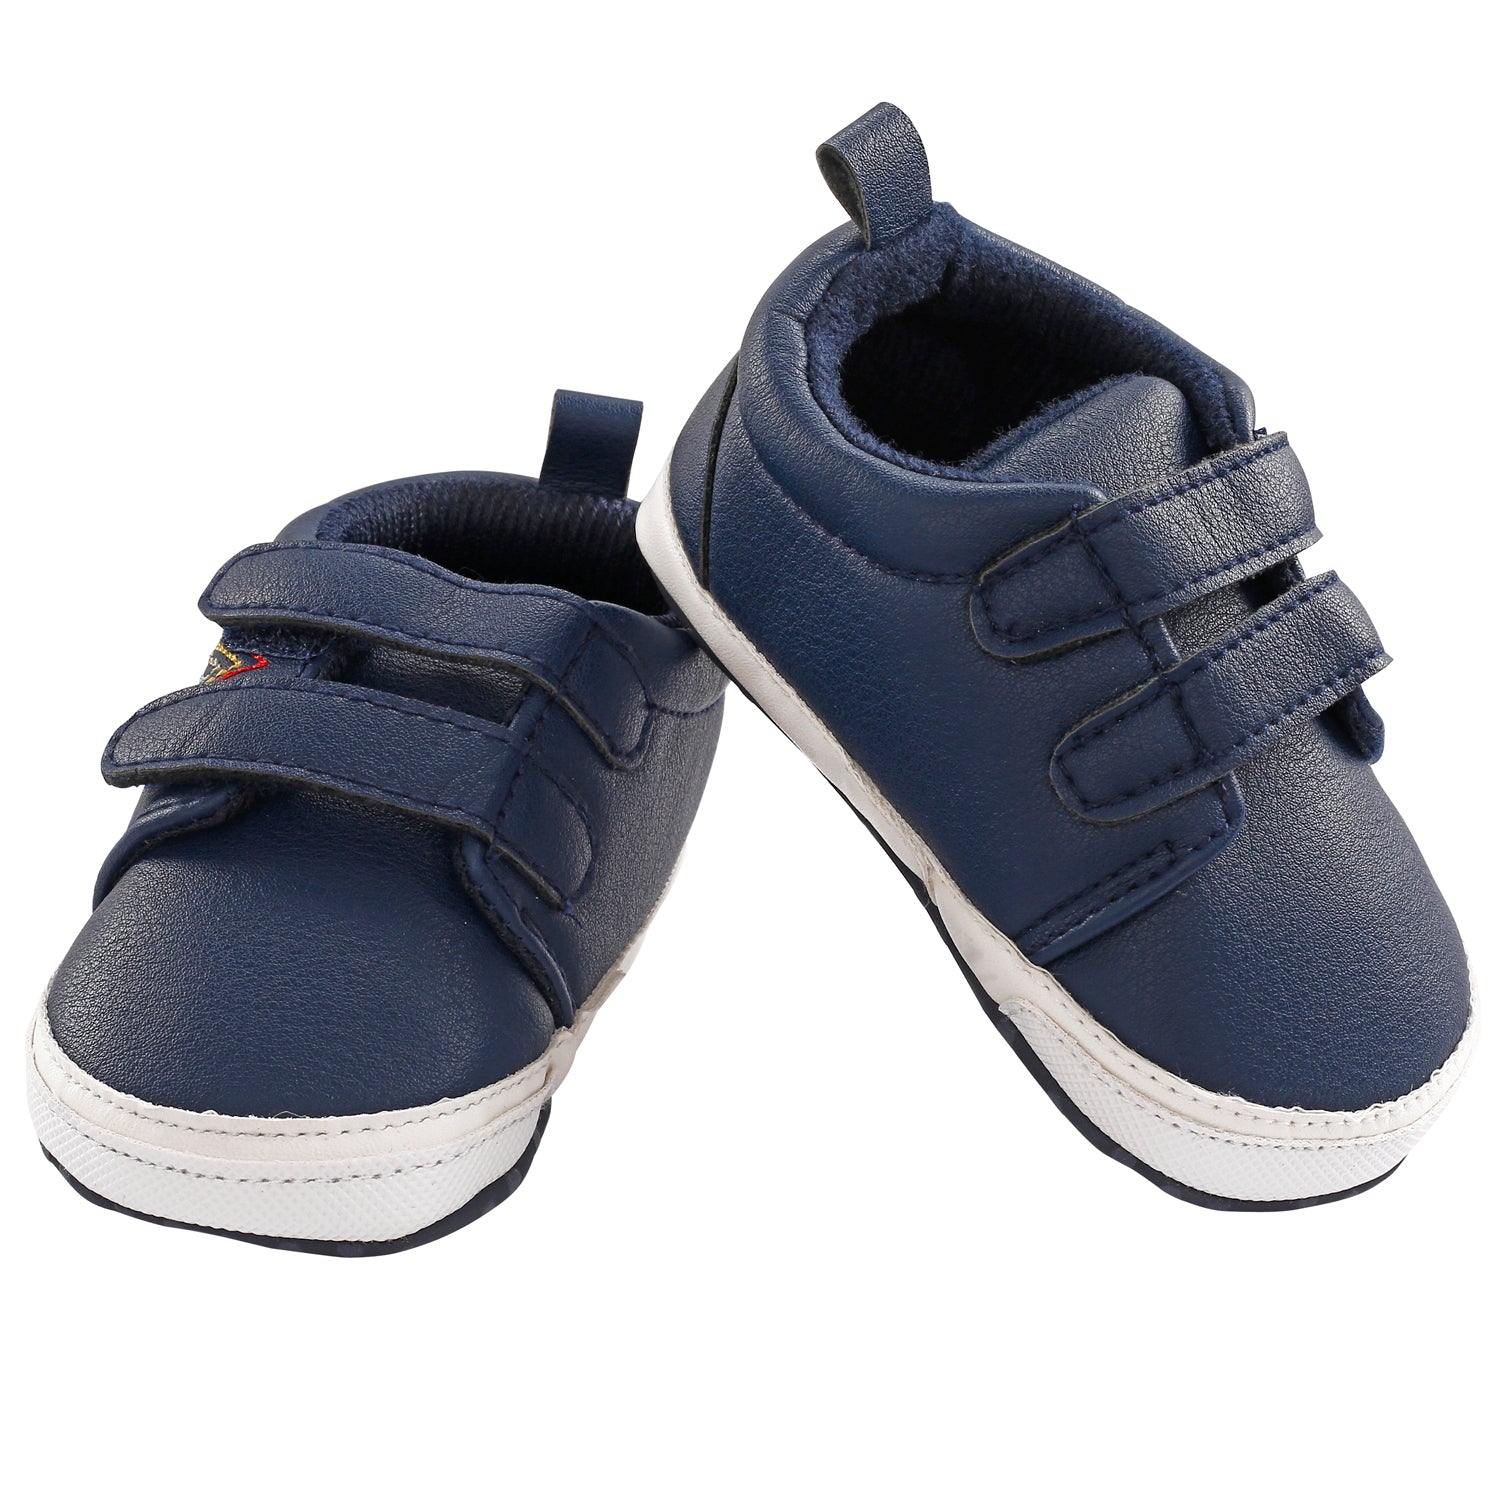 My Star Blue Casual Booties - Baby Moo